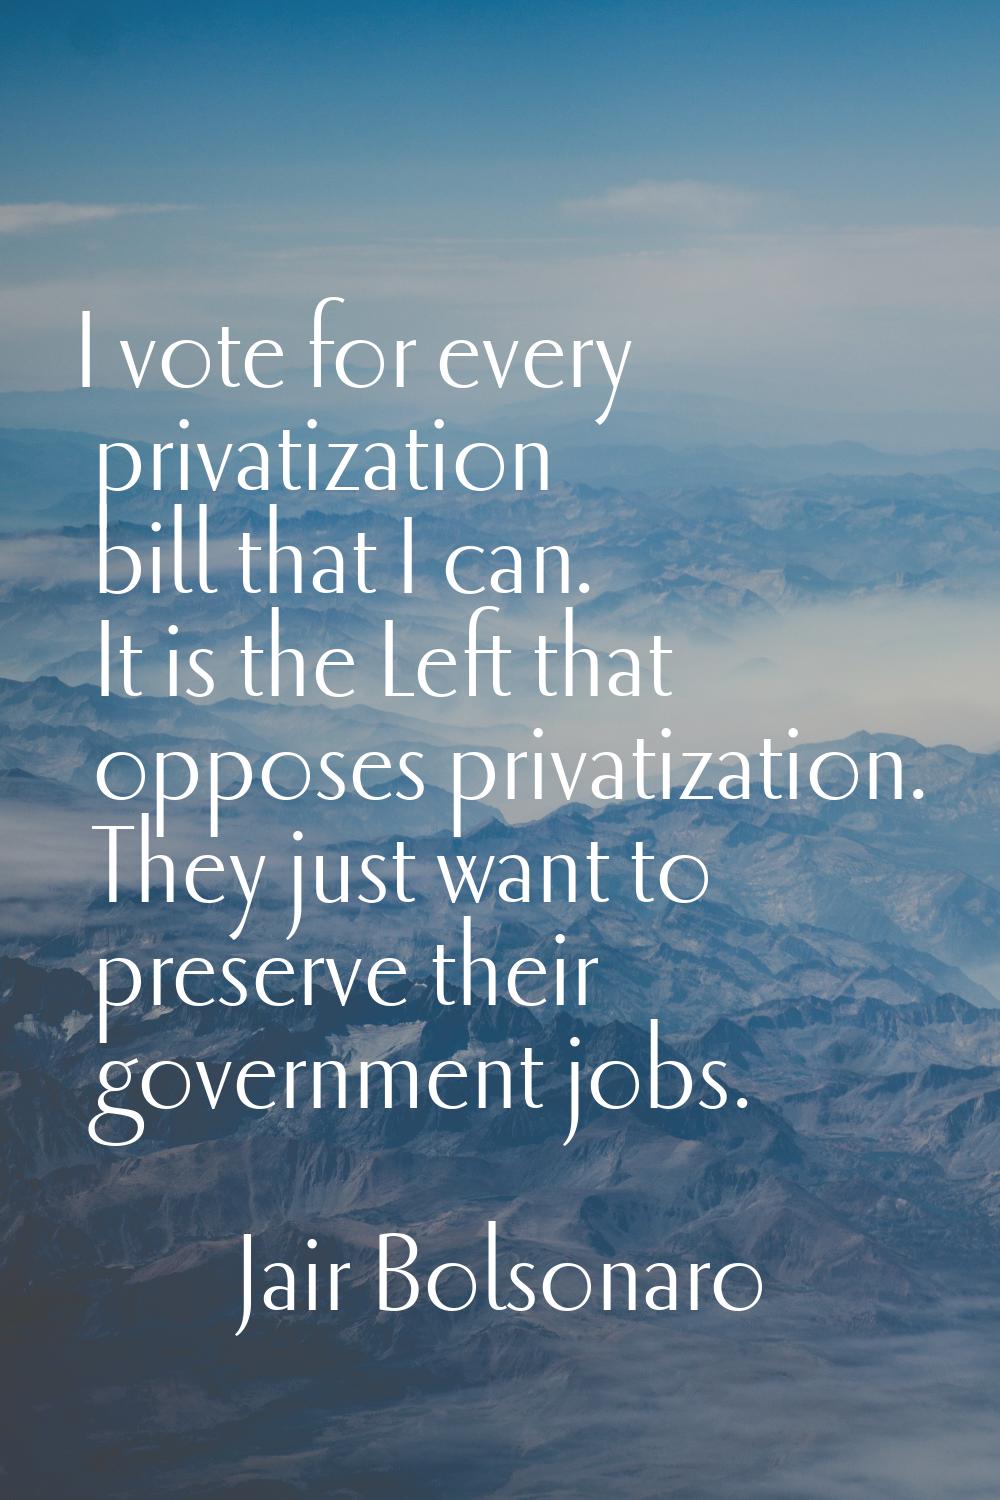 I vote for every privatization bill that I can. It is the Left that opposes privatization. They jus